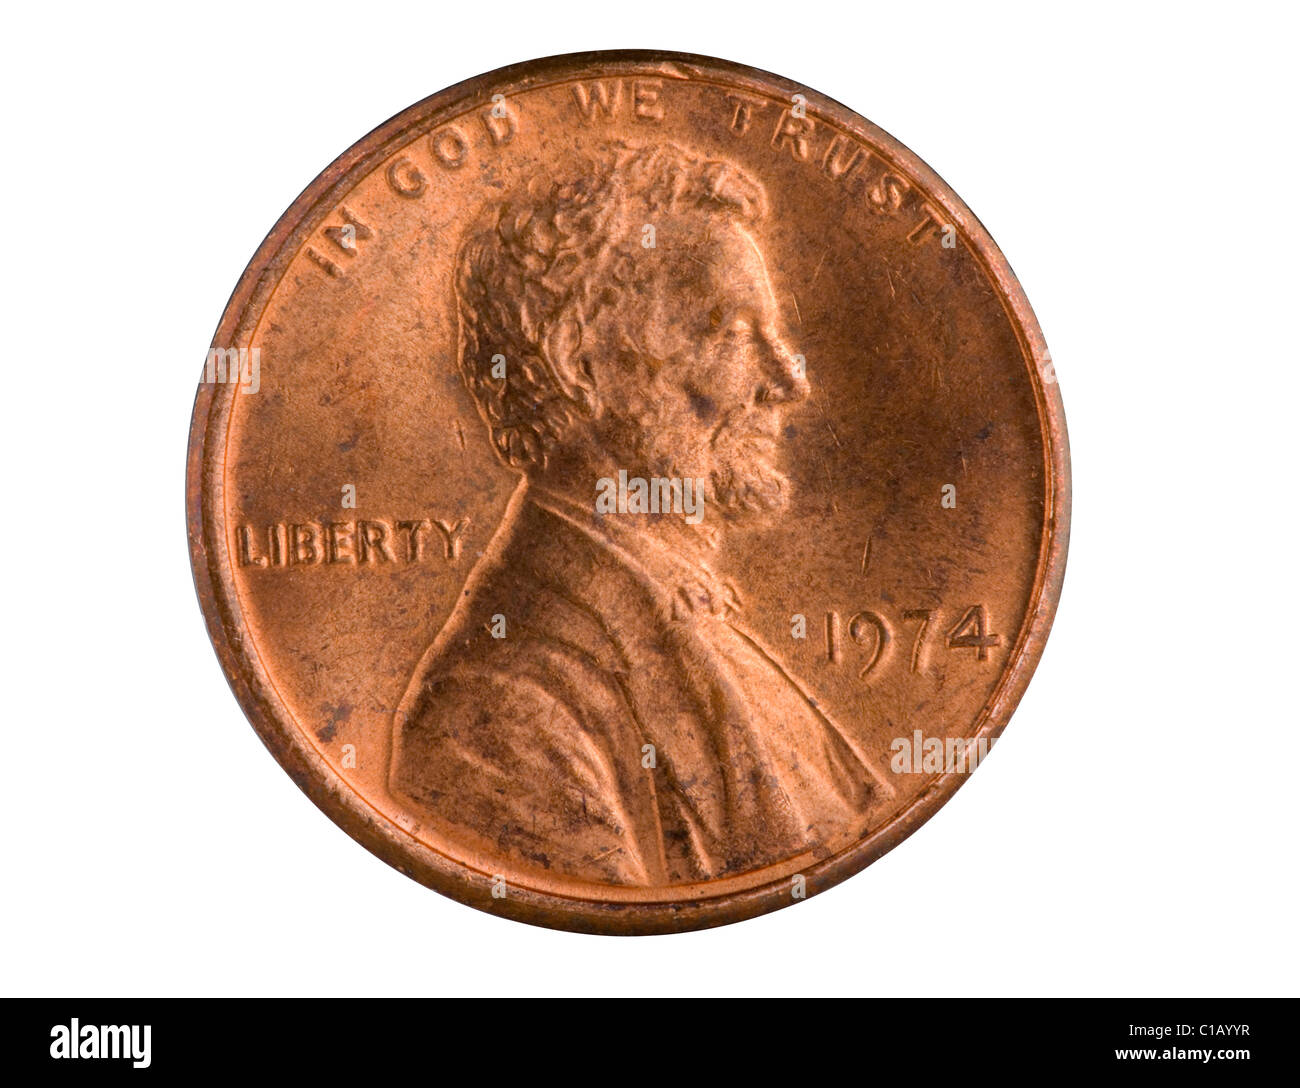 US 1 cent copper penny from 1974. Pennies made prior to 1983 had a much higher copper content and as a result of rising metals Stock Photo